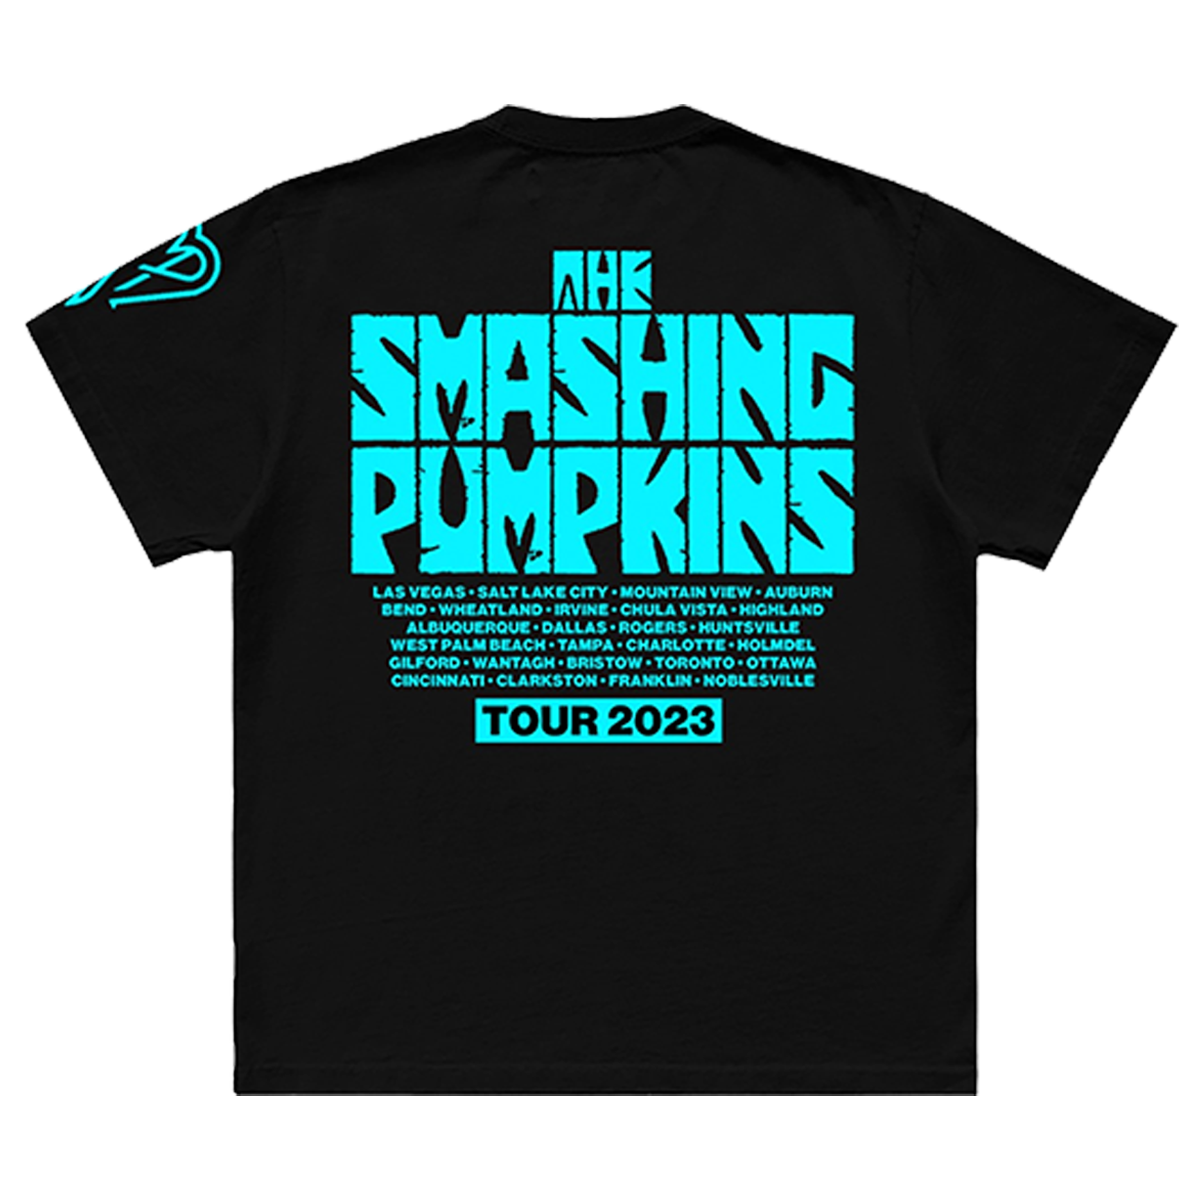 The World Is A Vampire Tour Tee